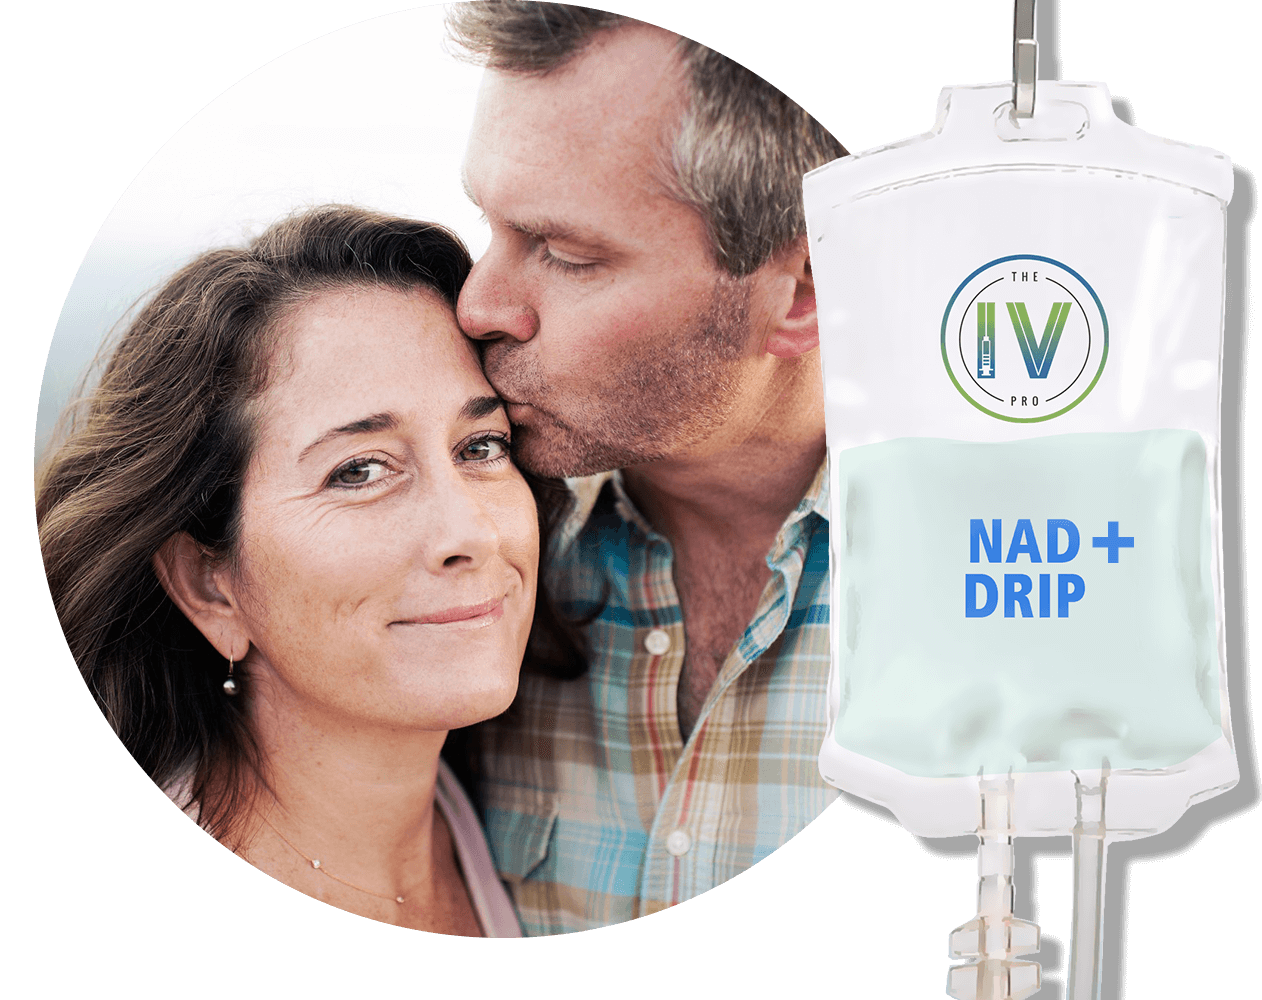 nad+ IV therapy in Boca Raton